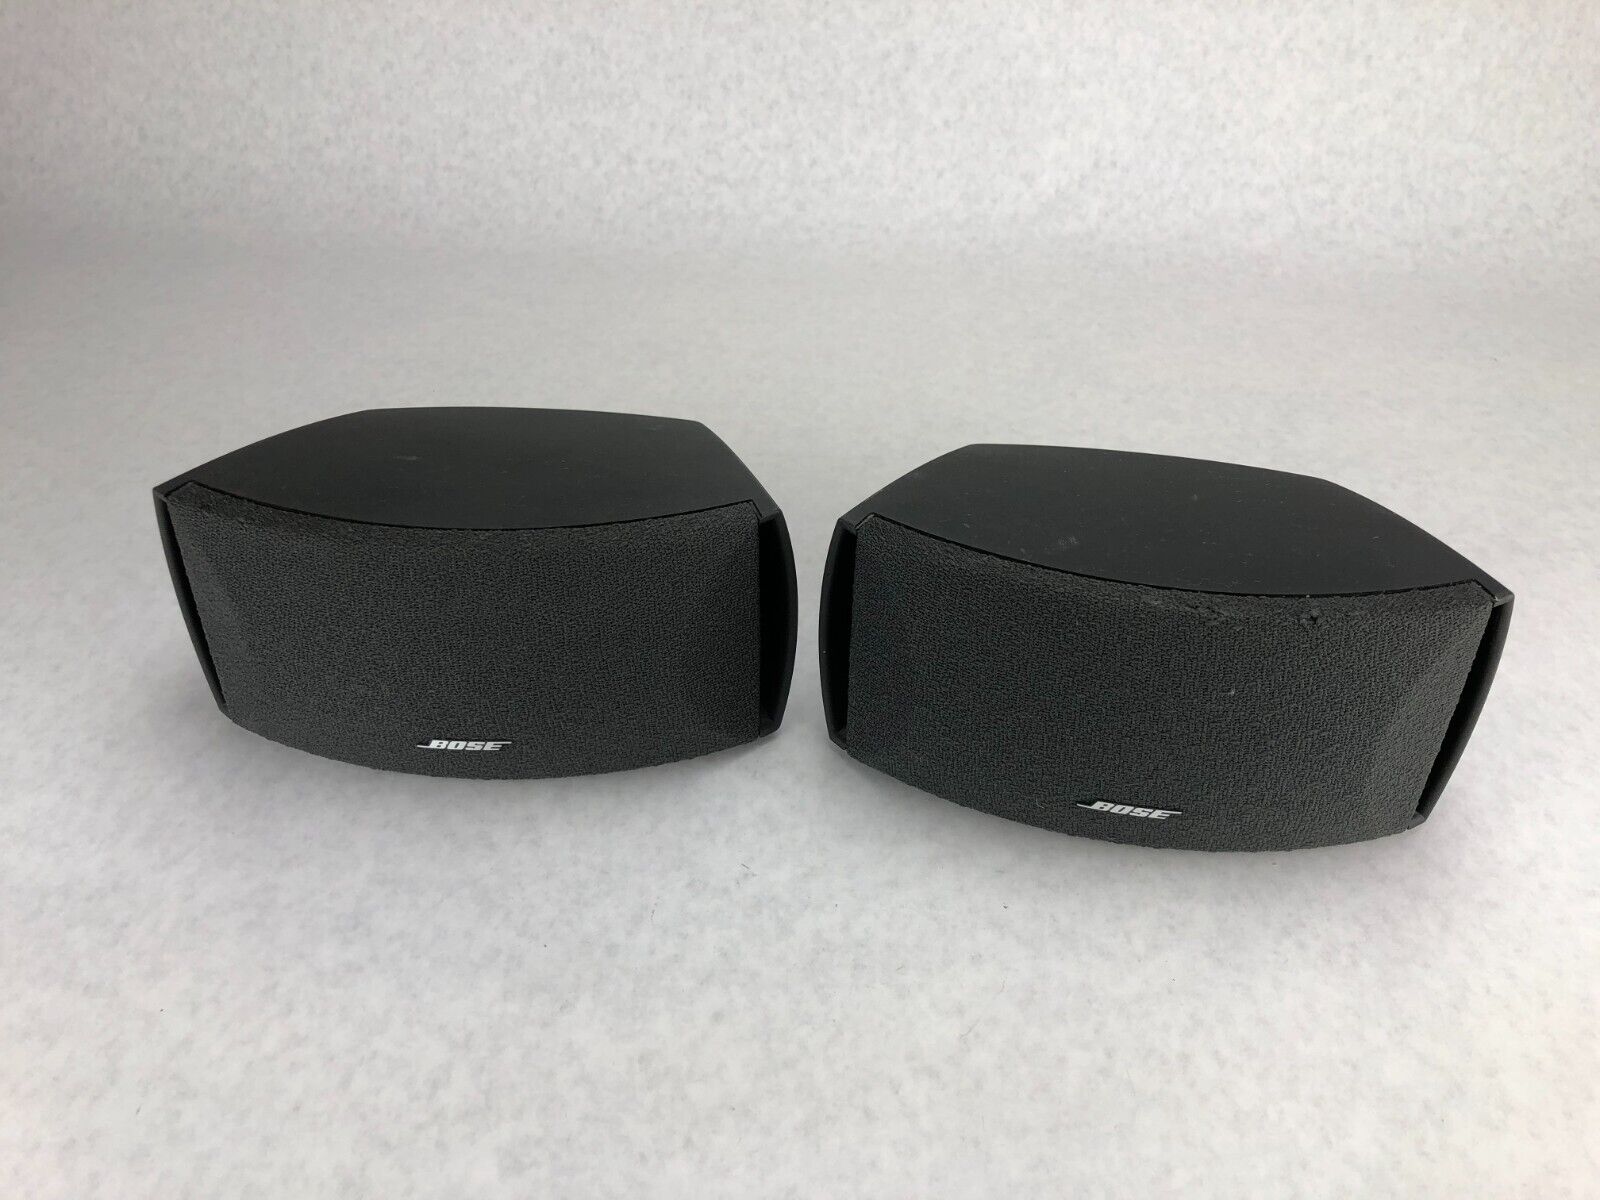 Bose CineMate Satellite Speakers w/ Cable Cord Home Theater